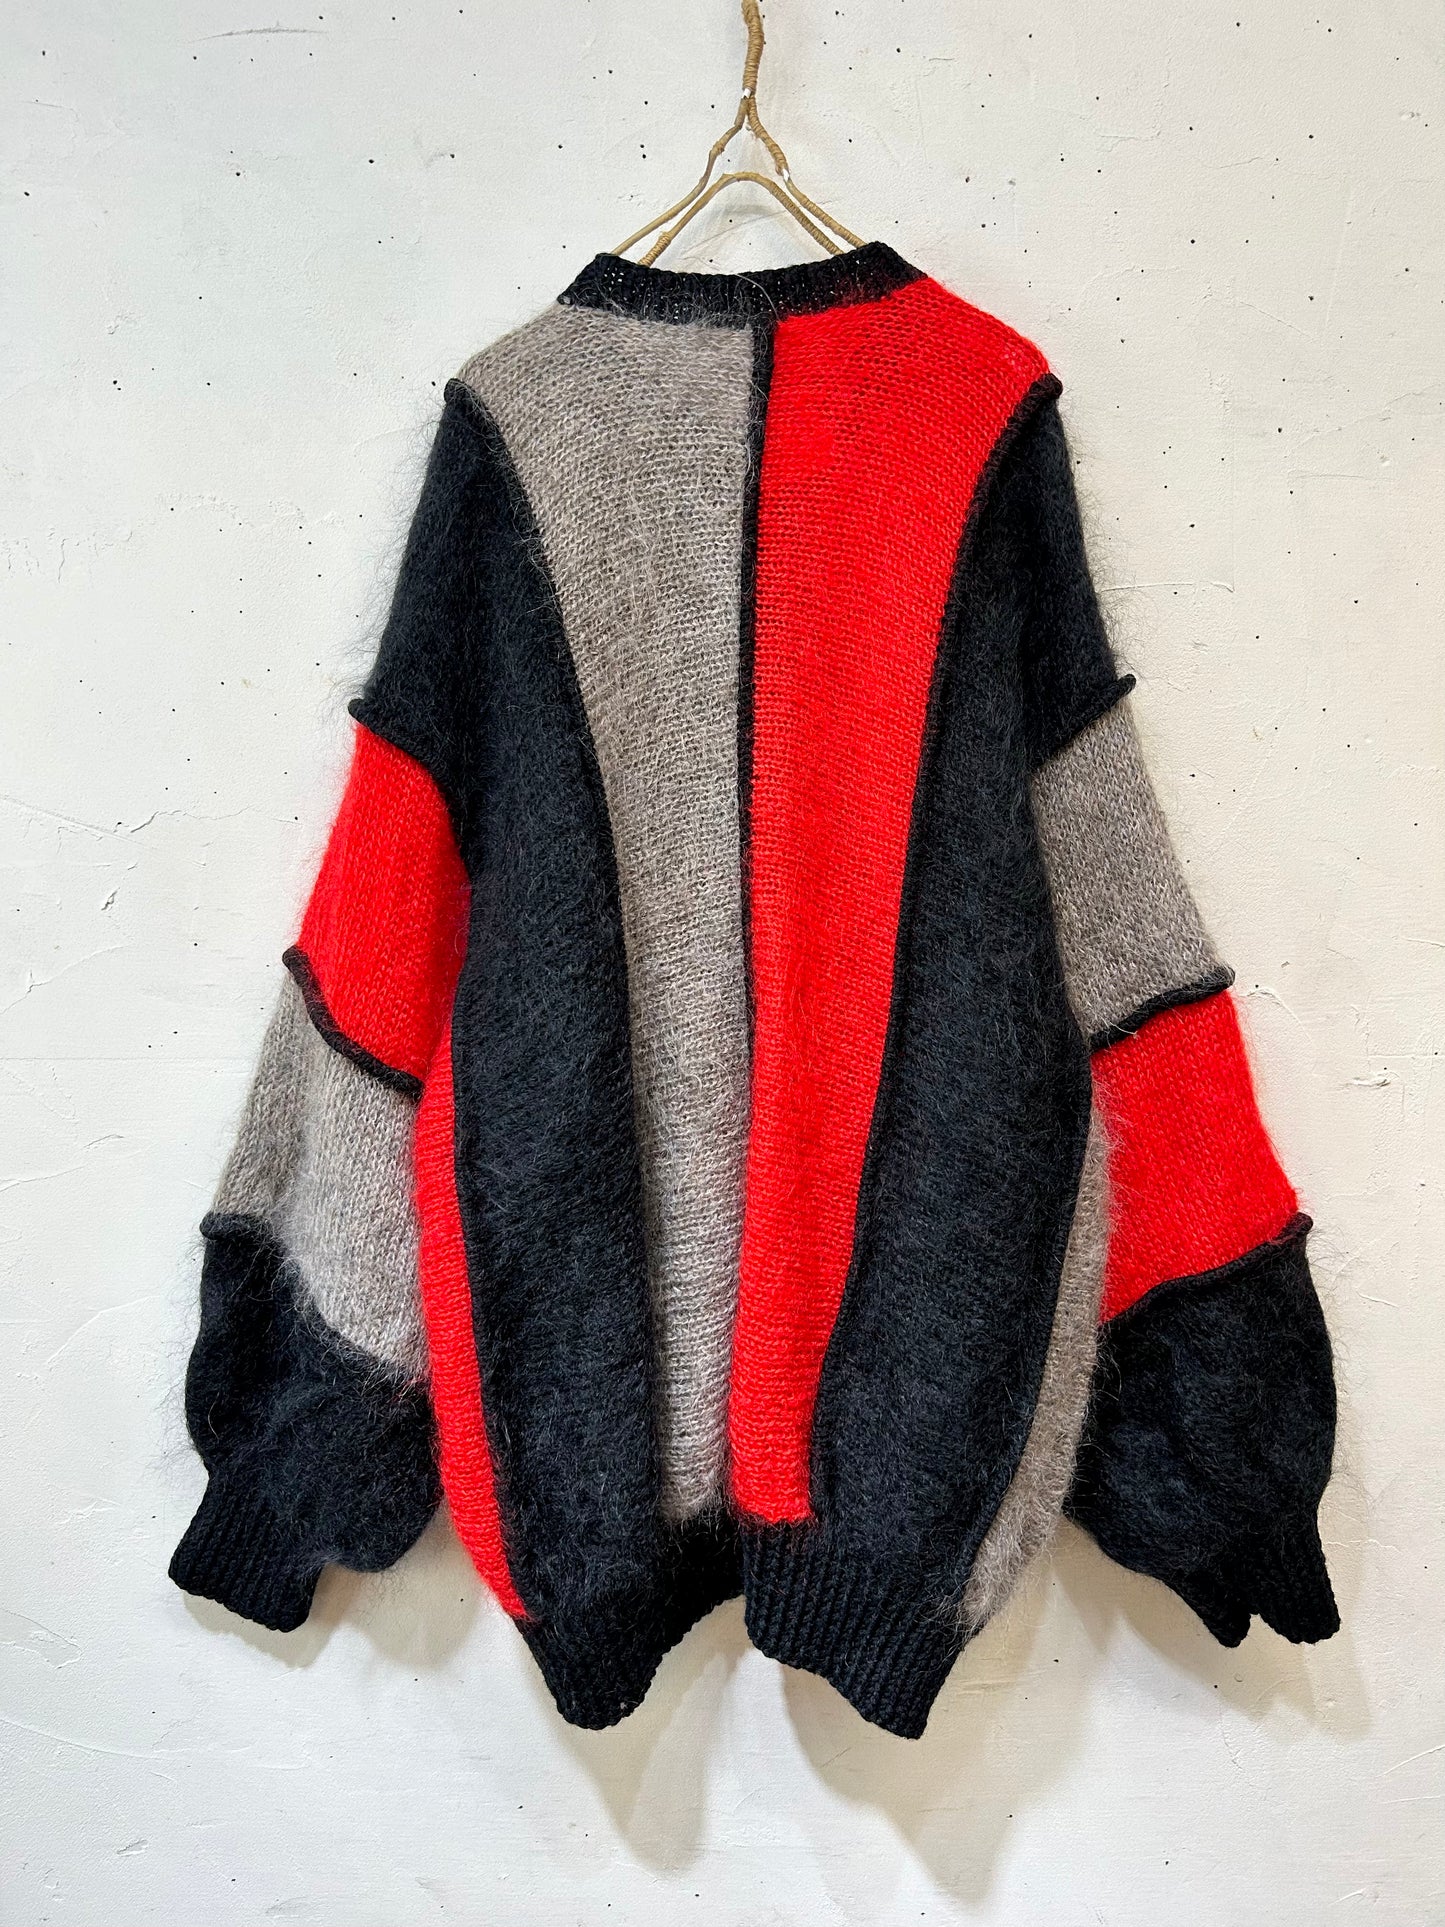 Vintage Mohair Knit Cardigan MADE IN IRELAND [K25570]